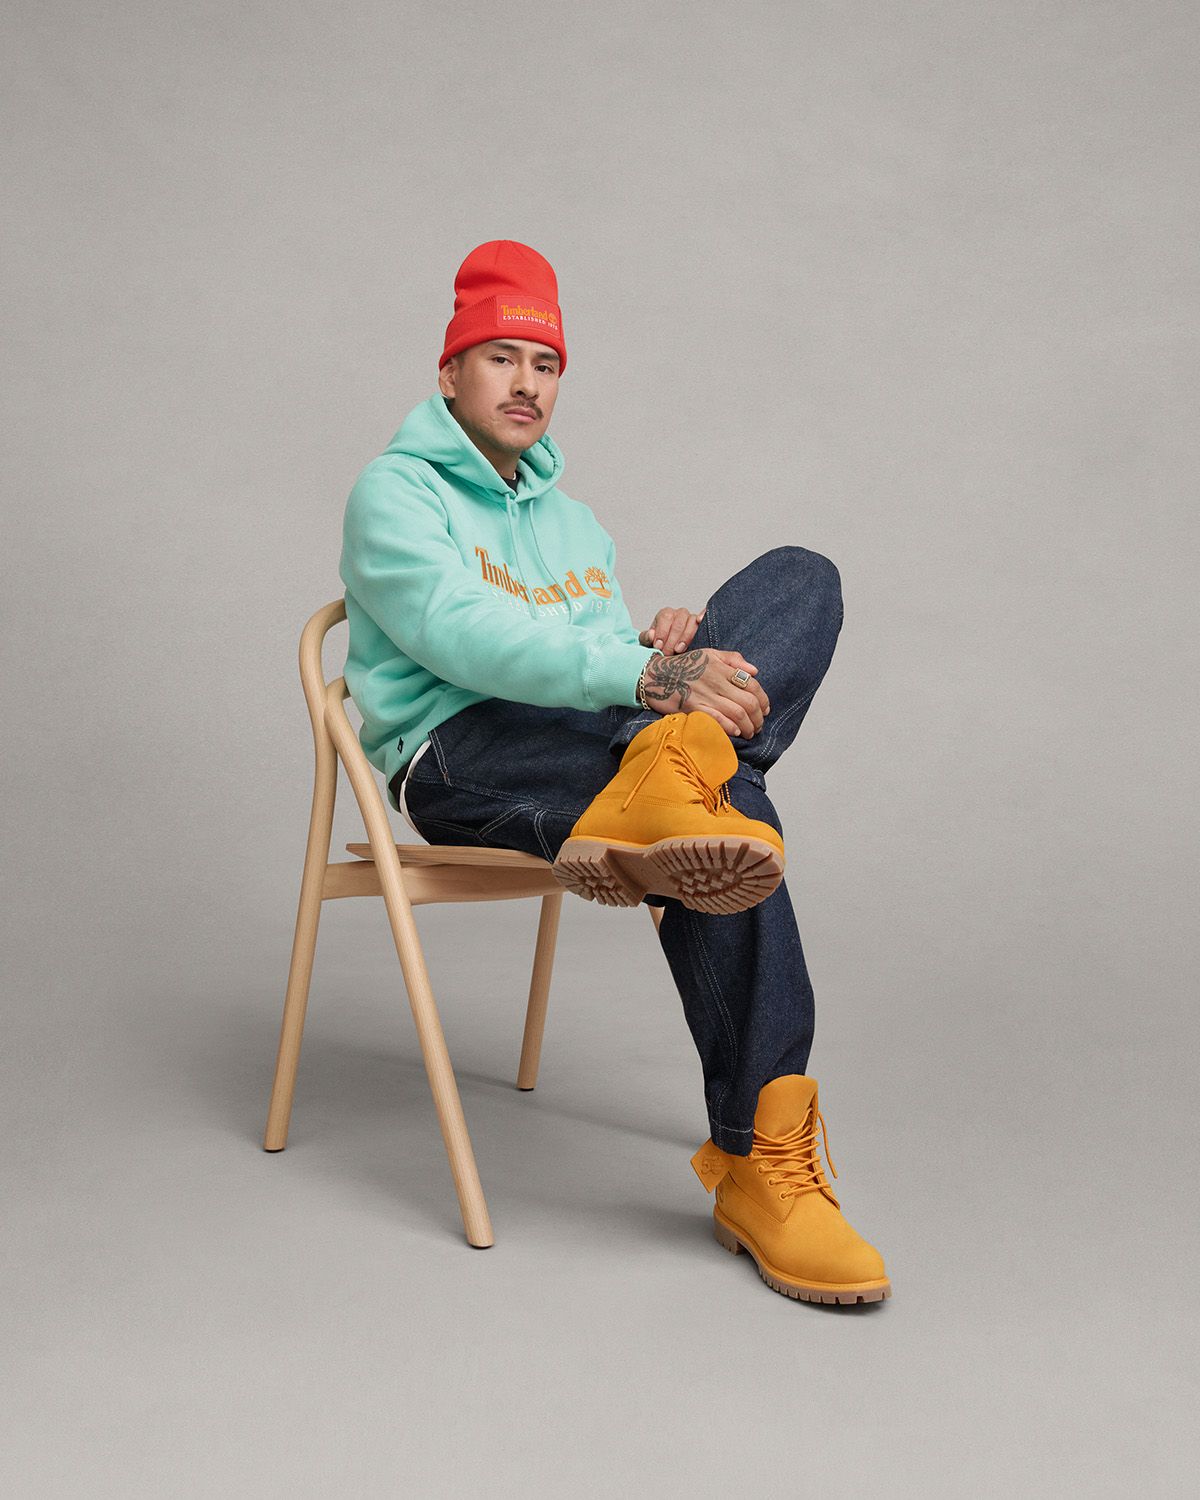 Man sitting in chair with orange timberland hat, light blue timberland sweatshirt, and dark cheddar timberland boots